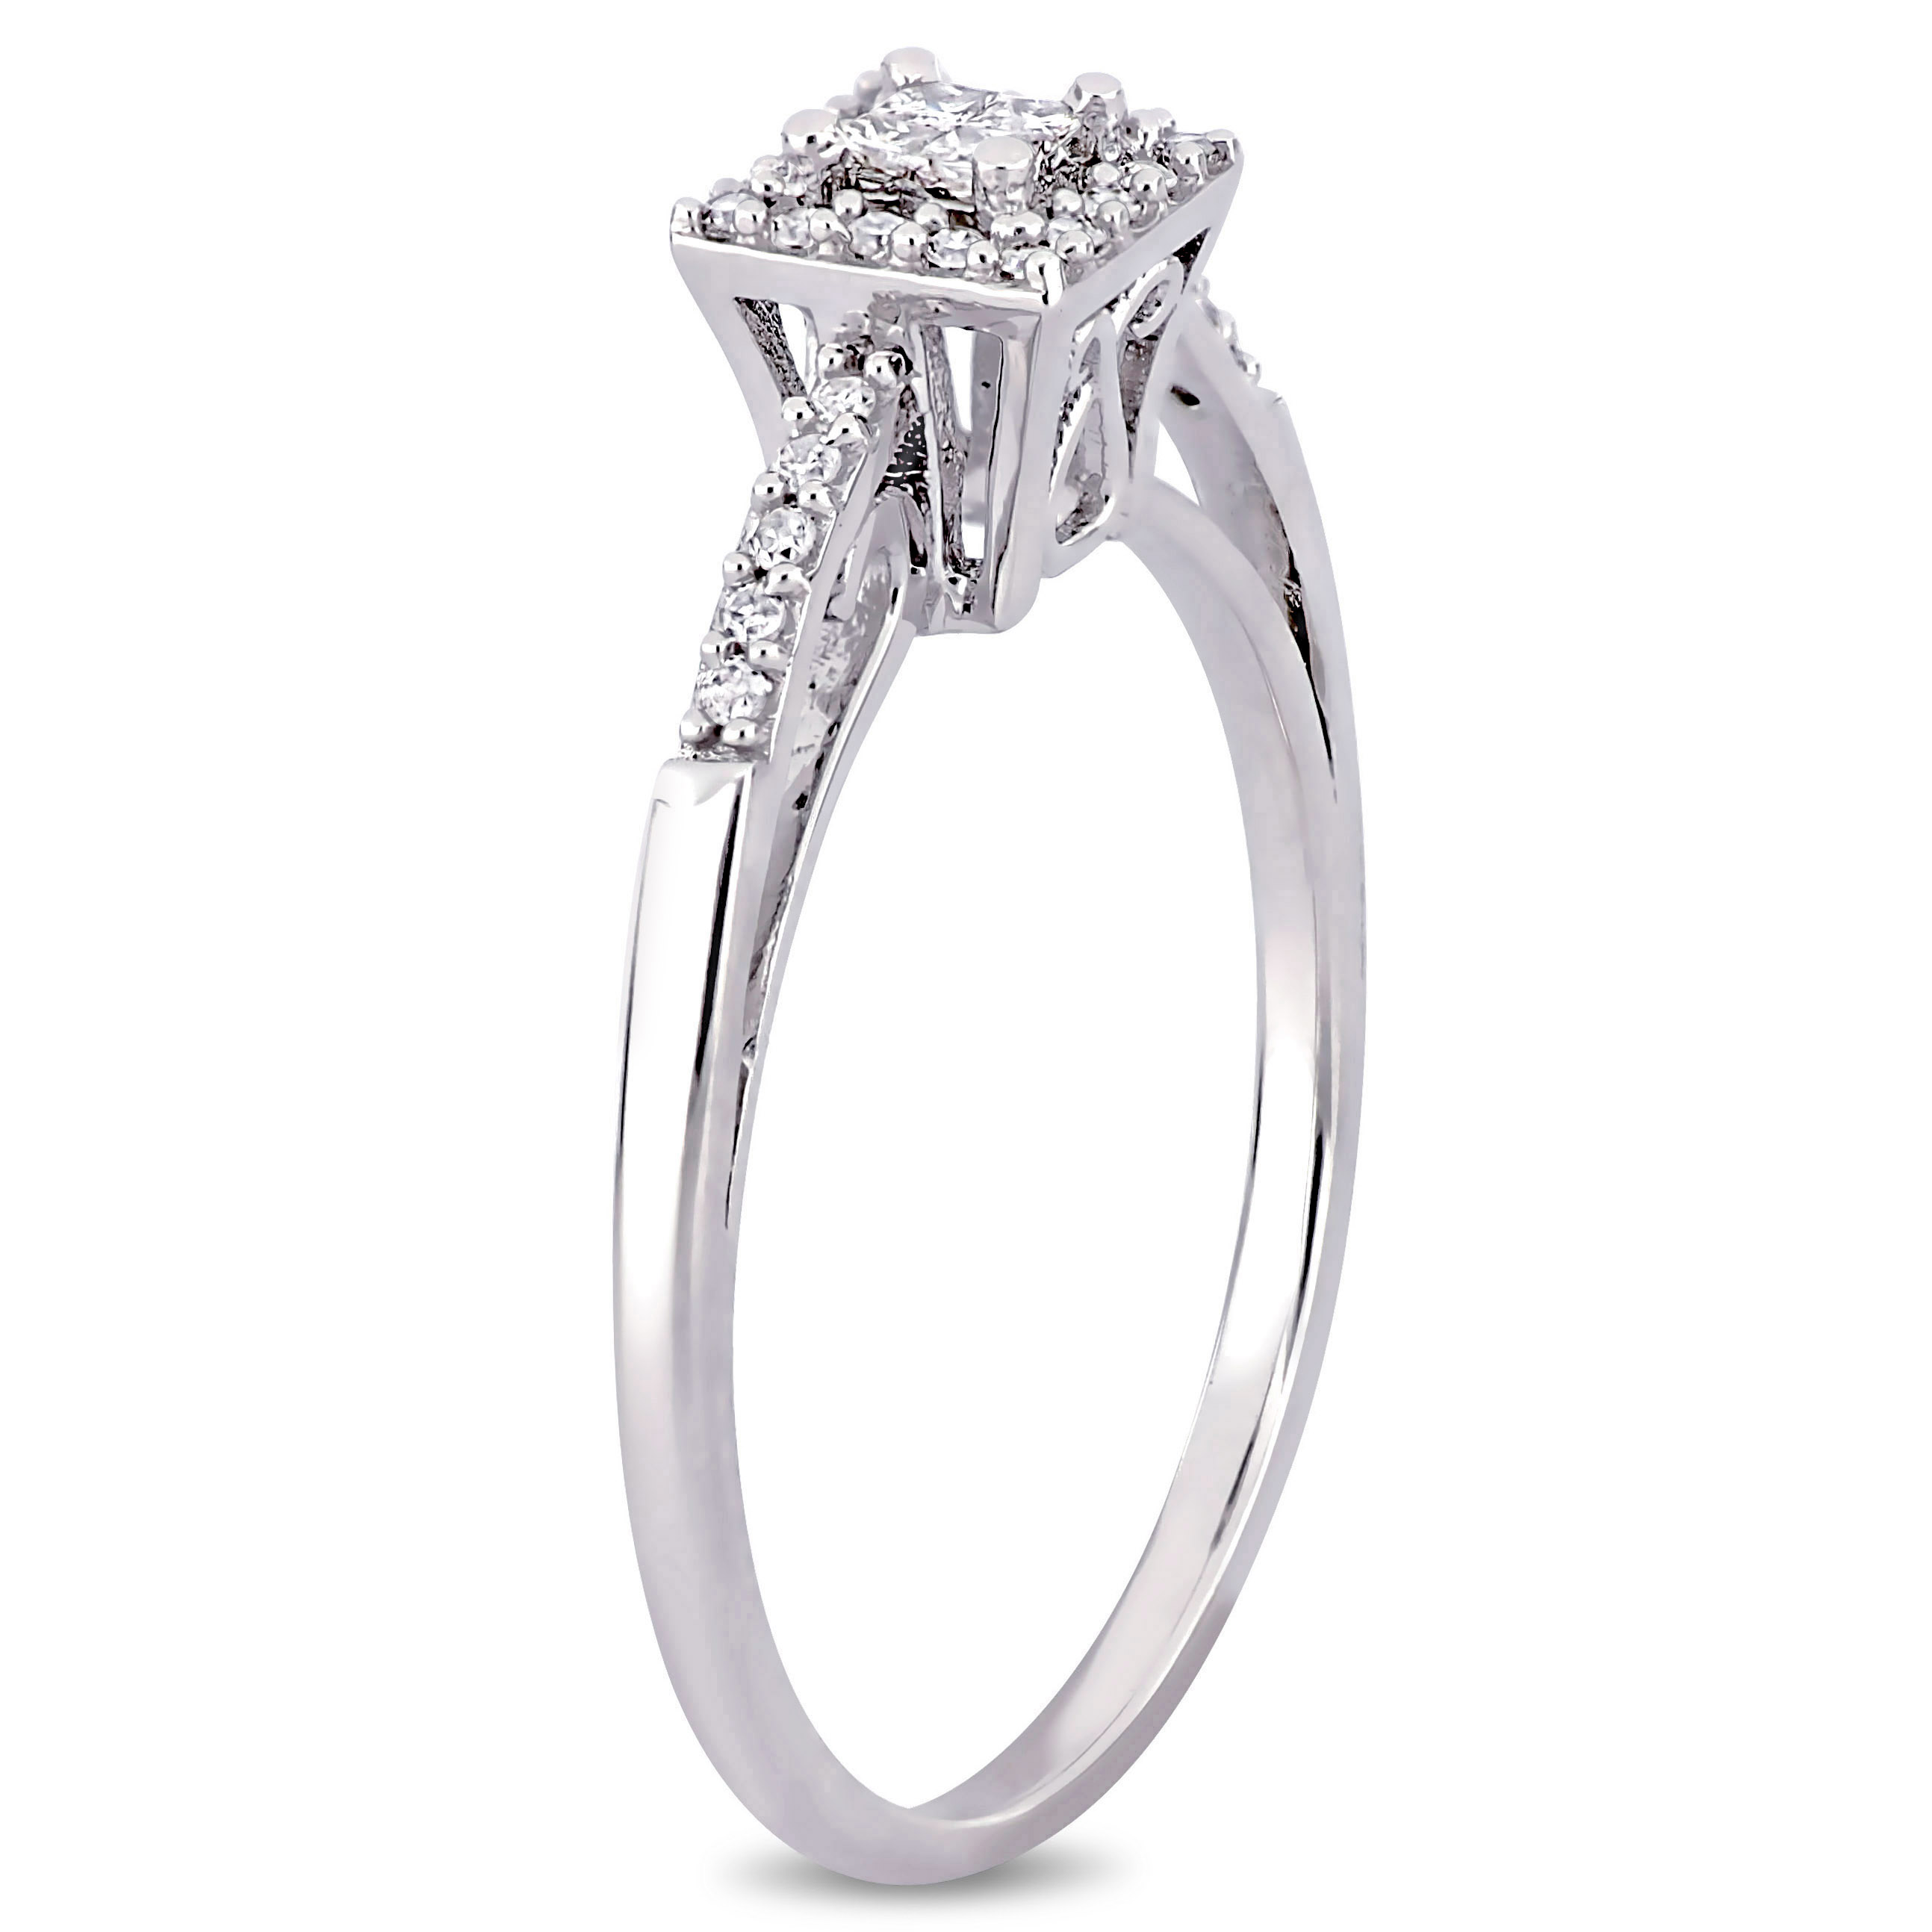 1/5 CT TW Princess Cut Quad and Round Diamond Halo Engagement Ring in 10k White Gold